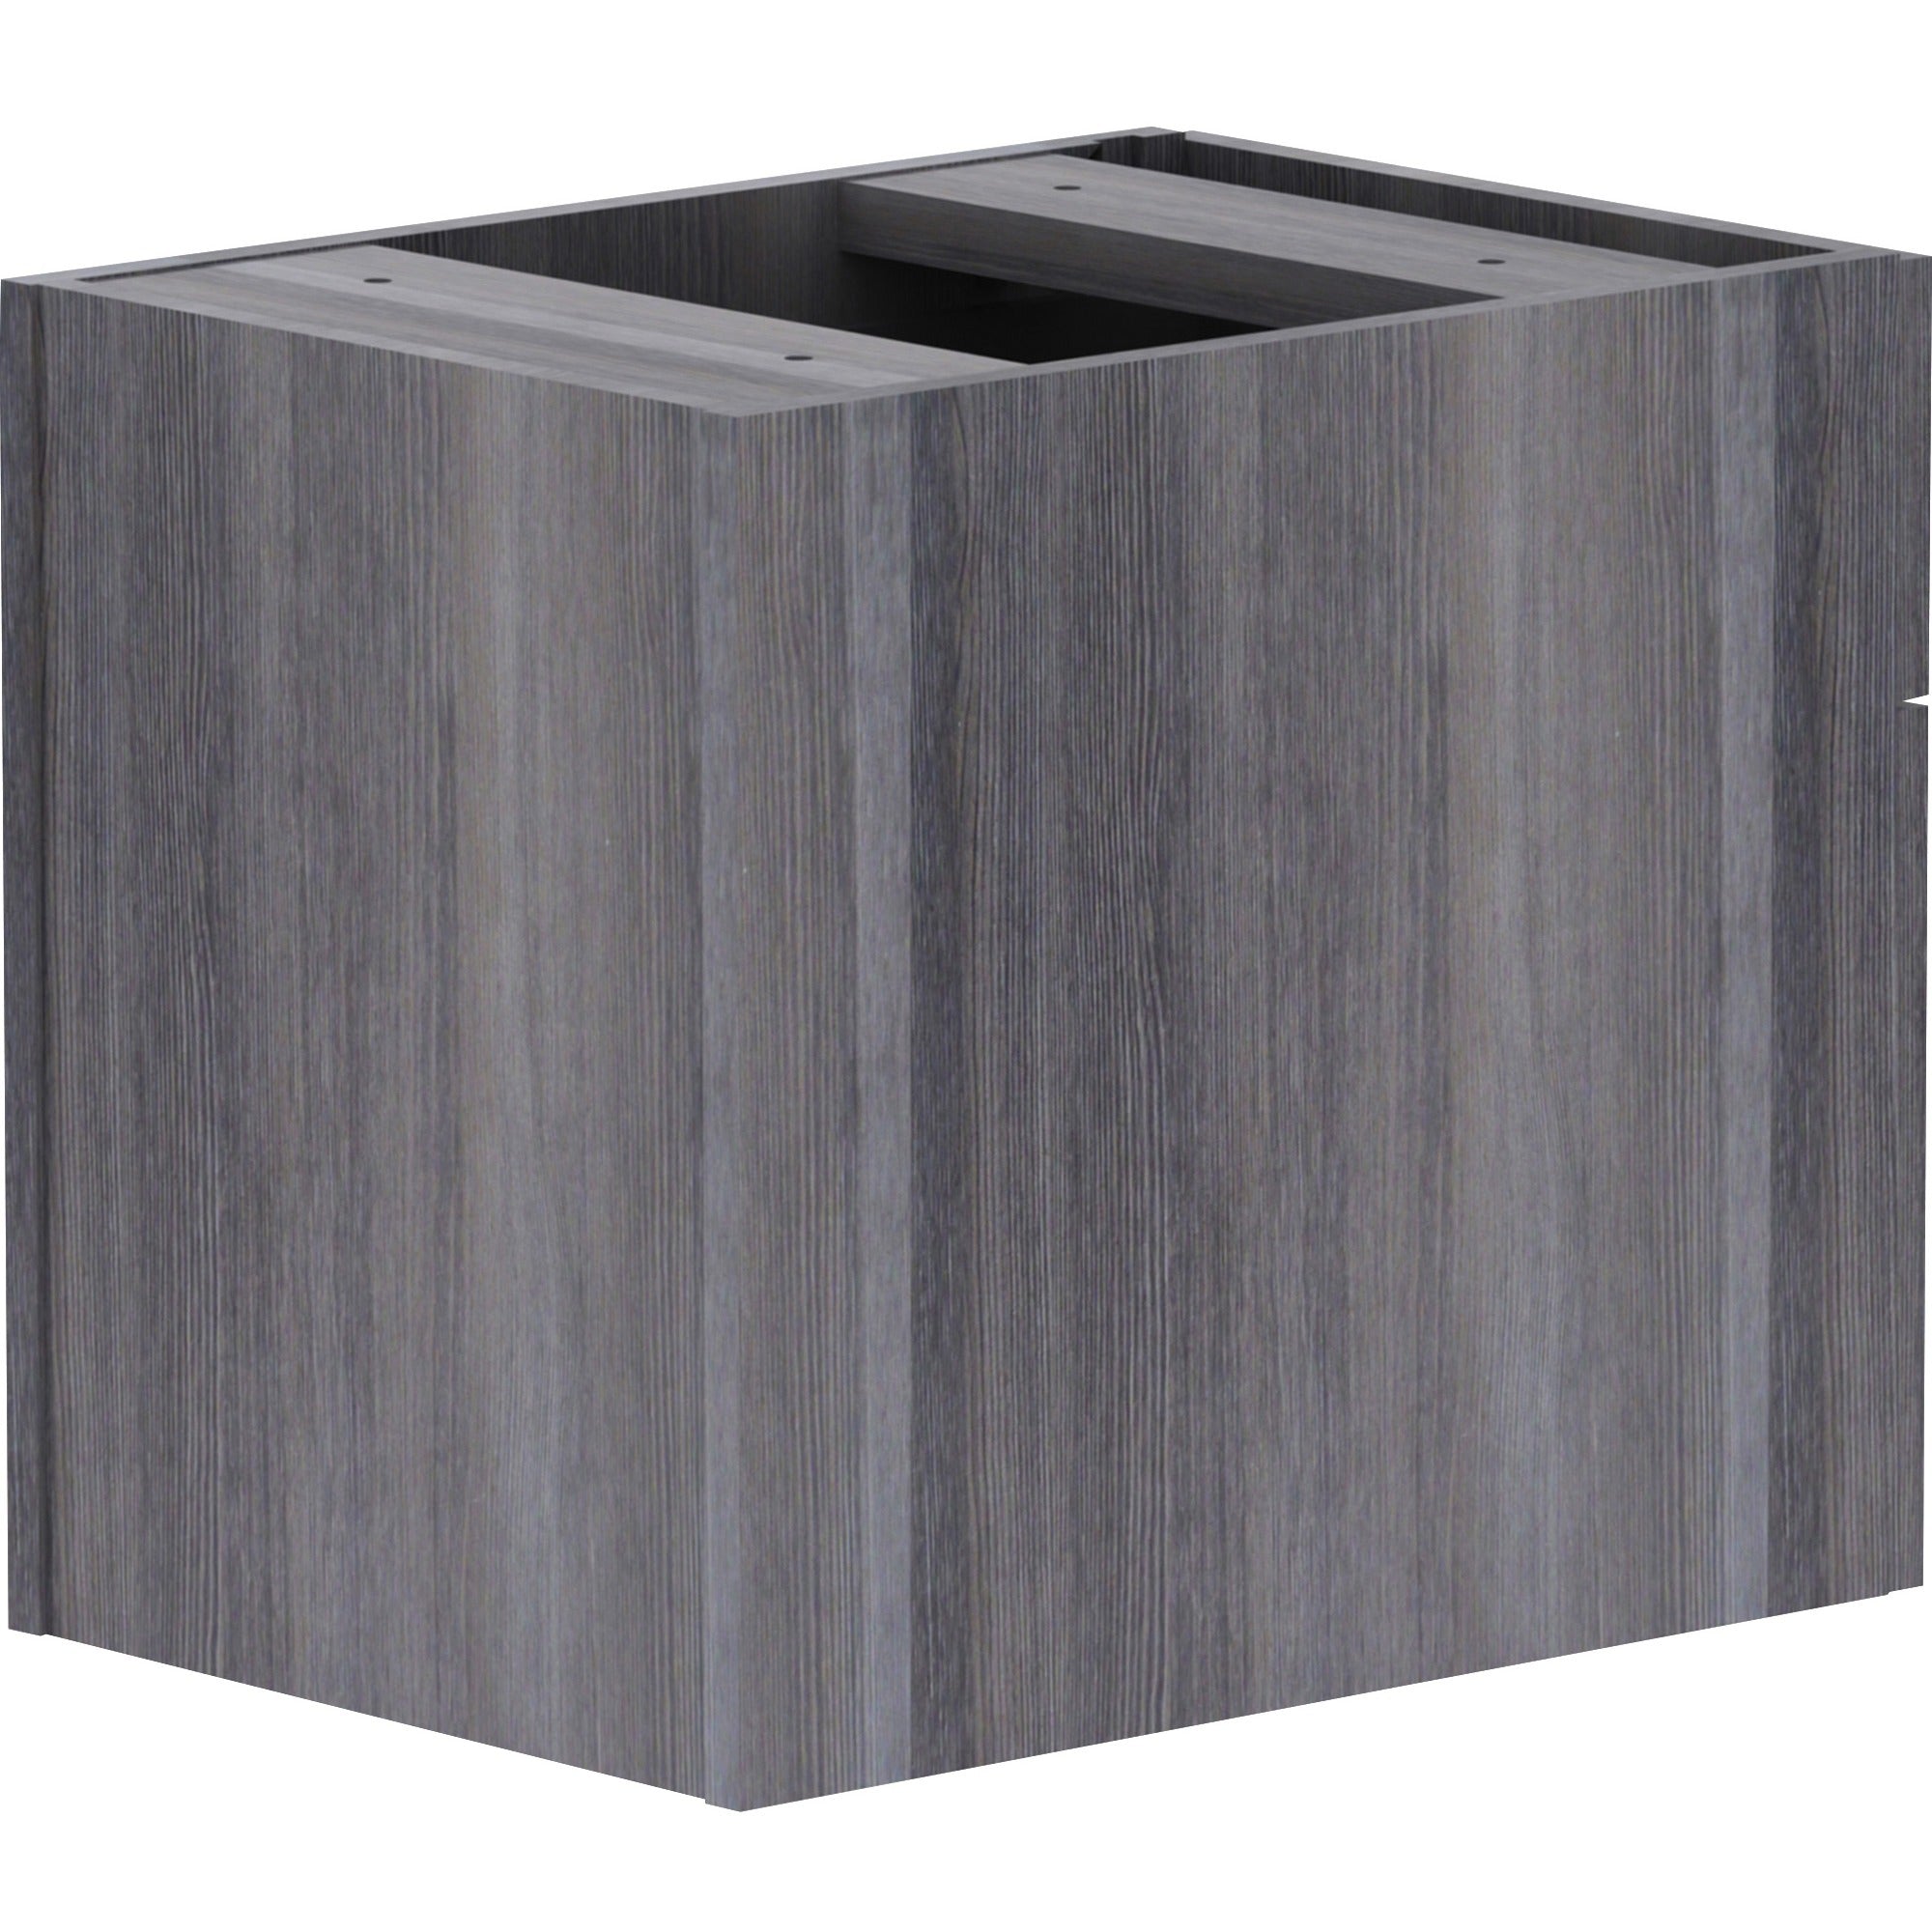 lorell-essentials-series-box-file-hanging-file-cabinet-16-x-12283-box-file-drawers-finish-weathered-charcoal-laminate_llr69562 - 4